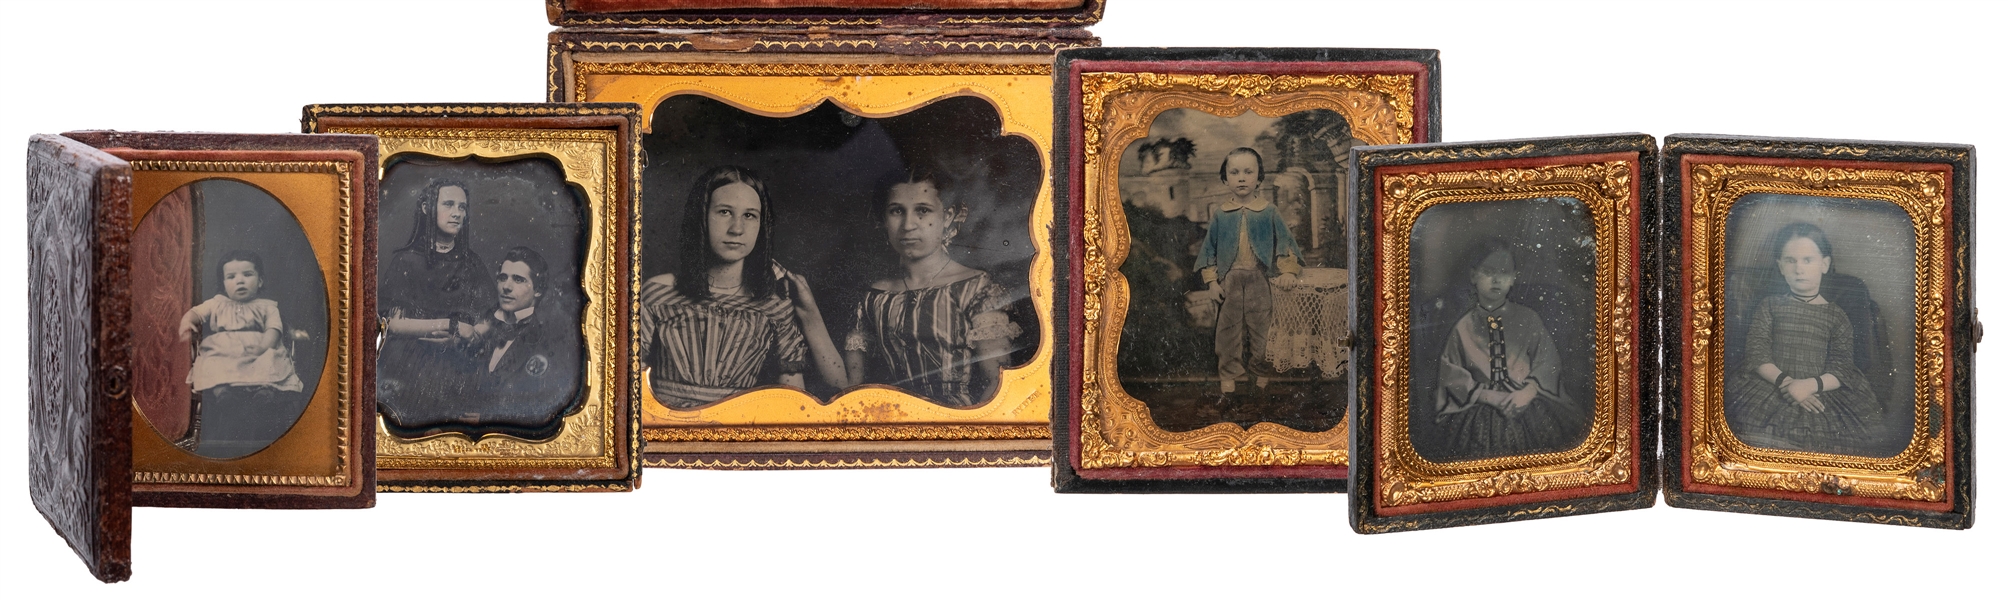  Group of 5 daguerreotypes with cases. American, 19th centur...